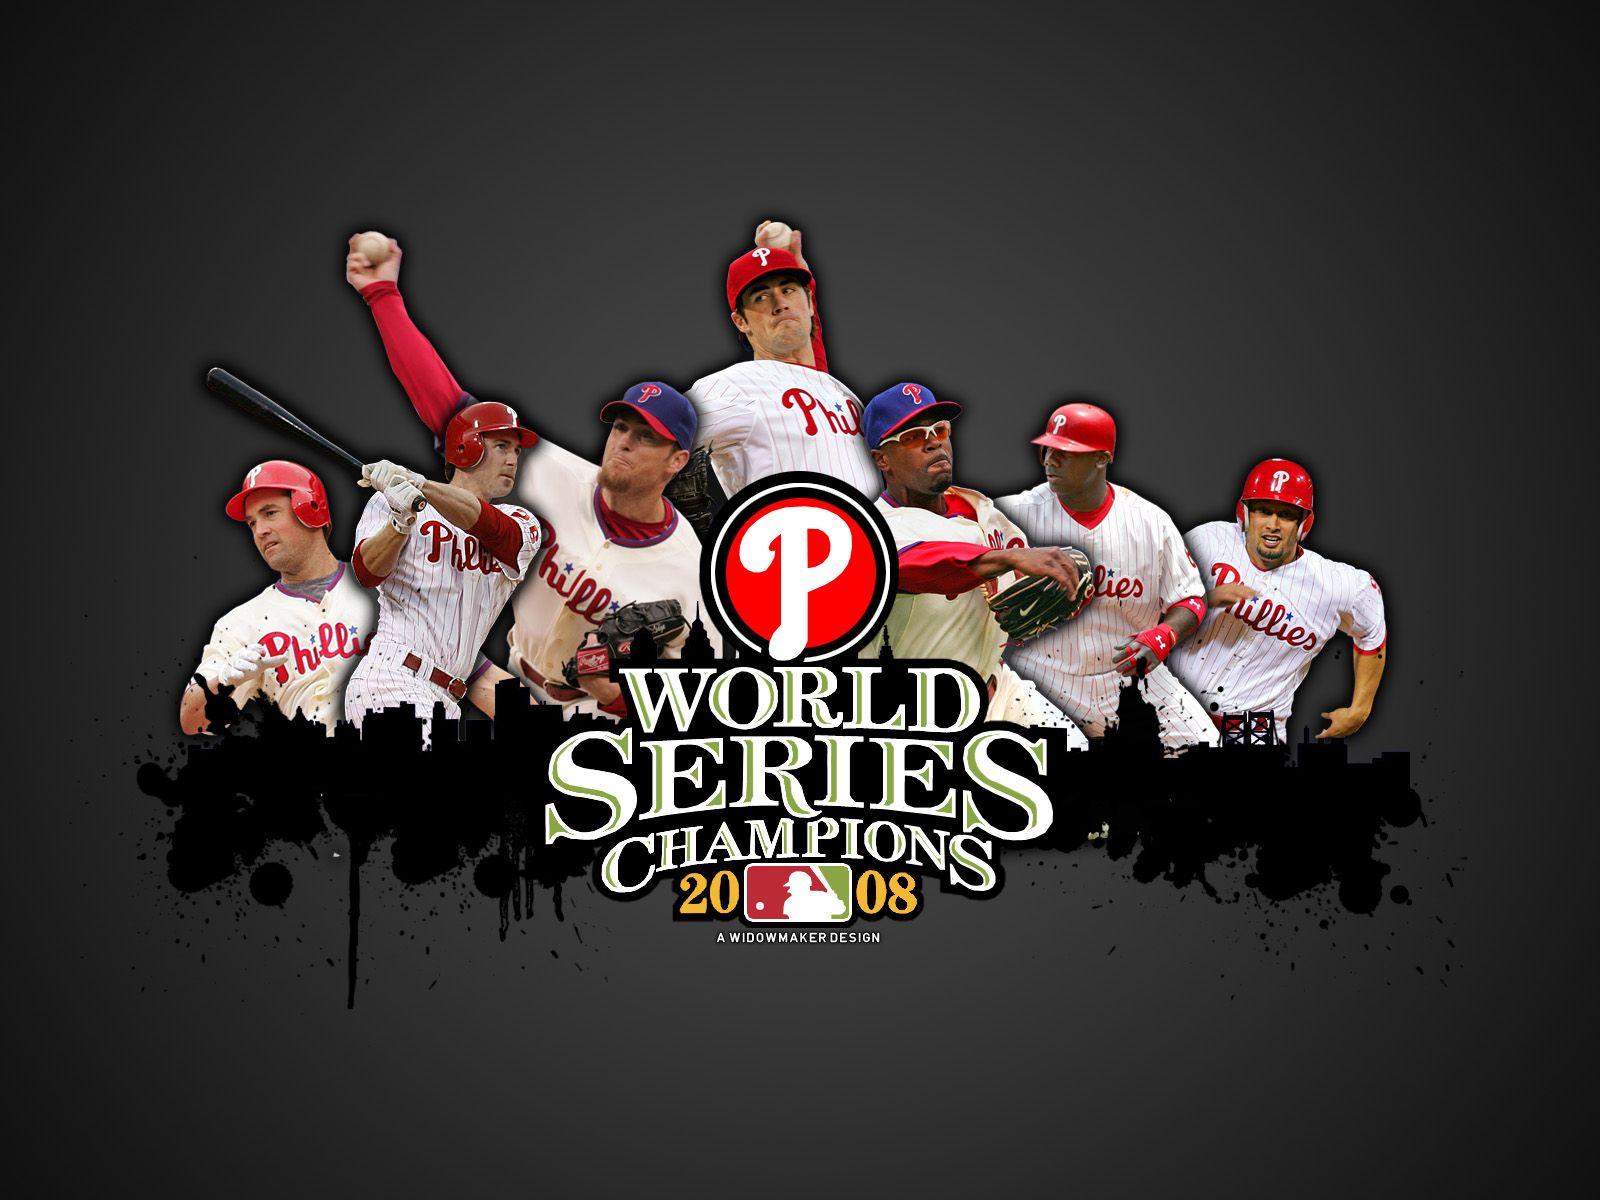 World Champs 2008!! #Phillies. Phillies. Champs